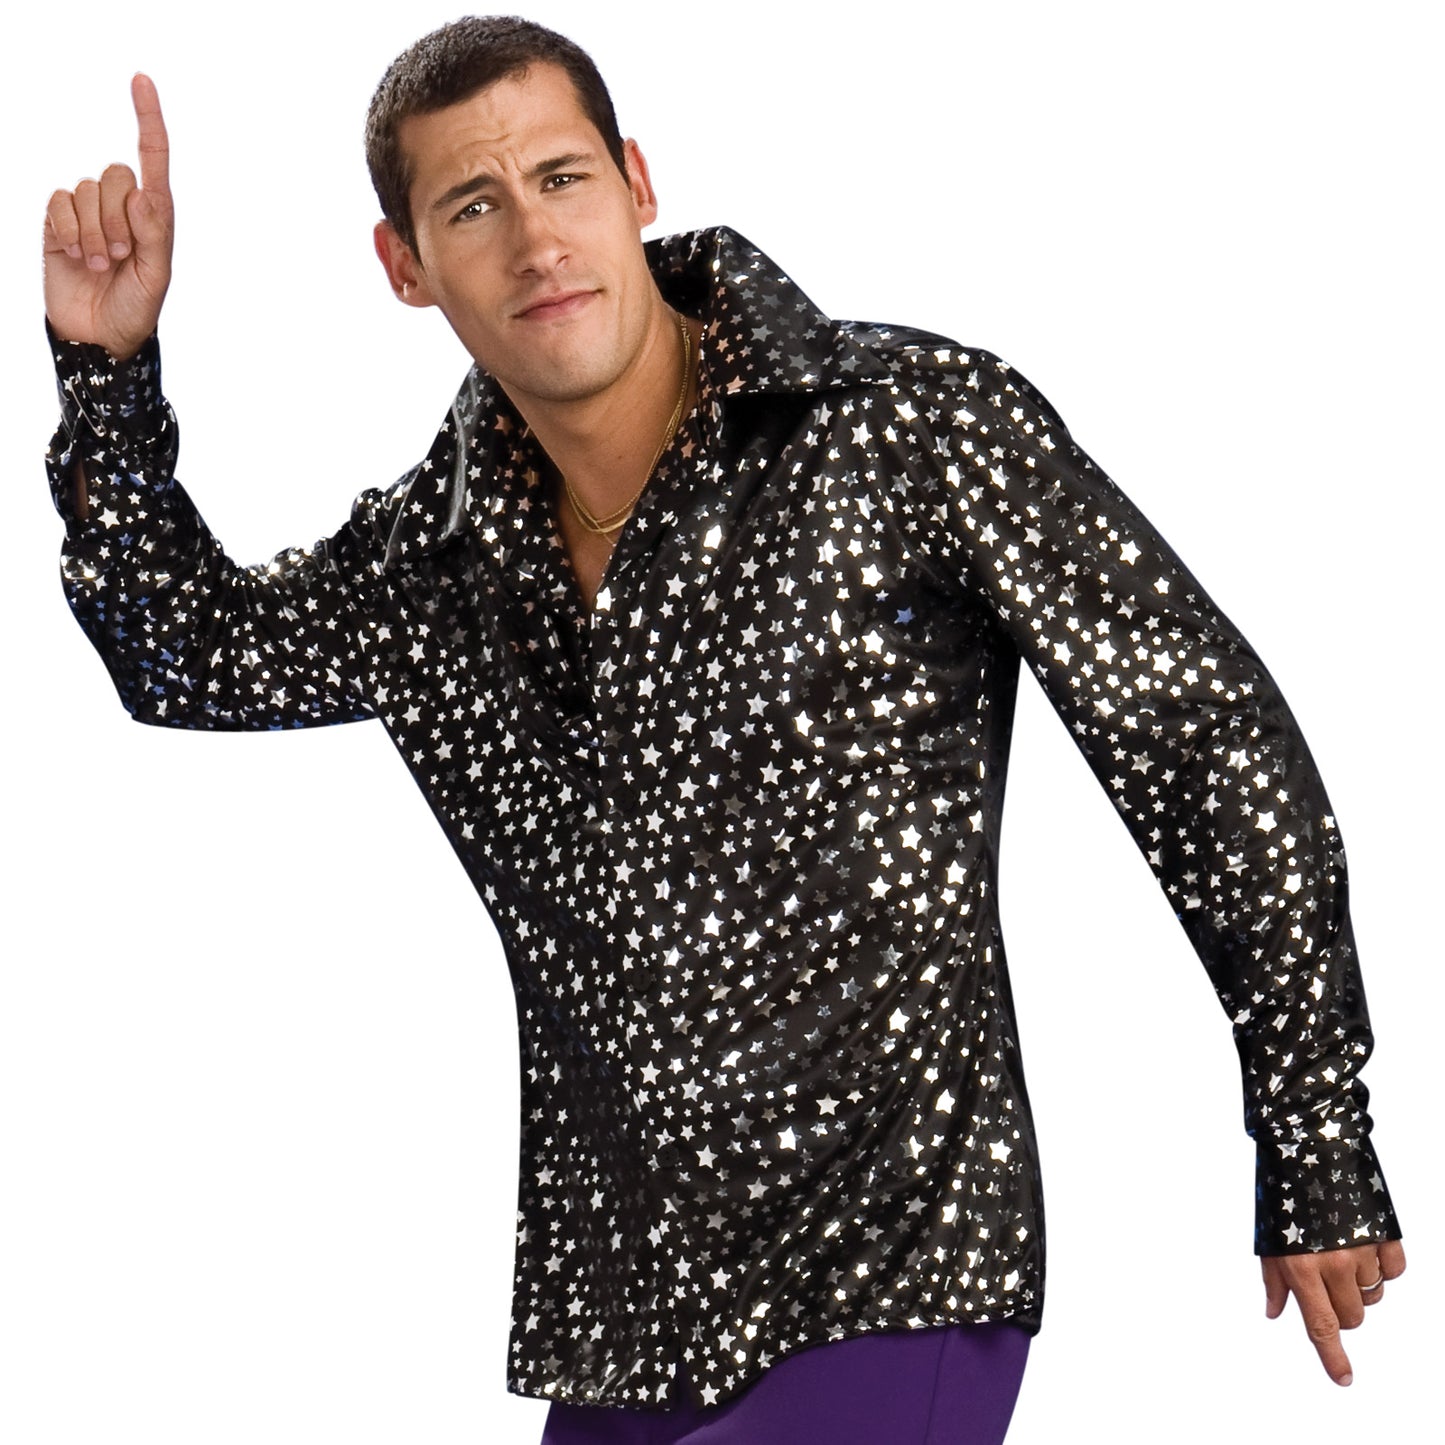 1980's Disco Men's Shirt with Silver Stars Men's Adult Costume